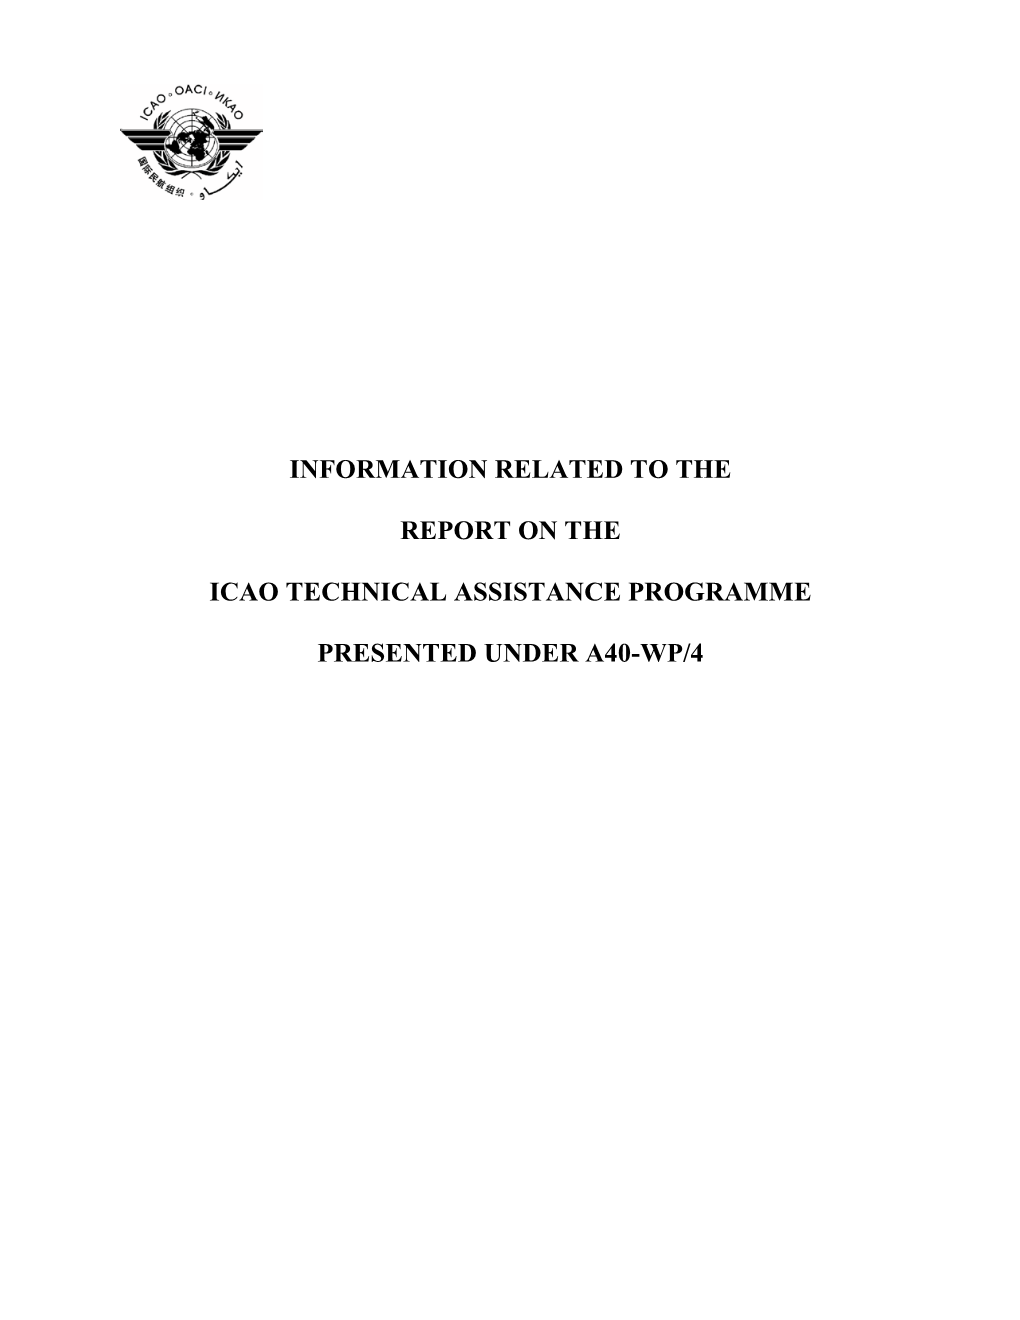 Information Related to the Report on the Icao